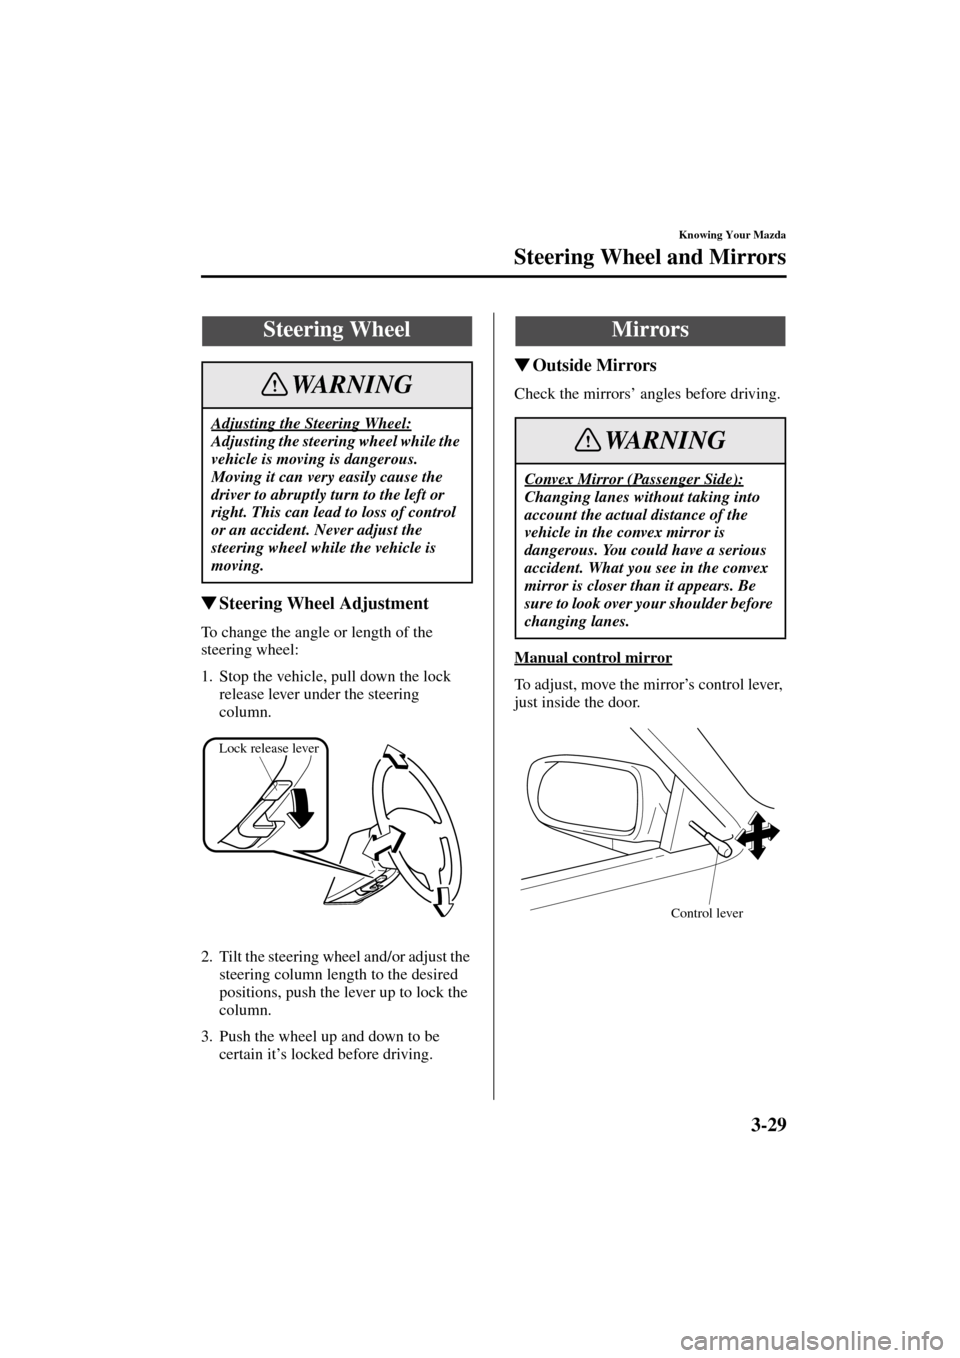 MAZDA MODEL 3 HATCHBACK 2004  Owners Manual (in English) 3-29
Knowing Your Mazda
Form No. 8S18-EA-03I
Steering Wheel and Mirrors
Steering Wheel Adjustment
To change the angle or length of the 
steering wheel:
1. Stop the vehicle, pull down the lock 
releas